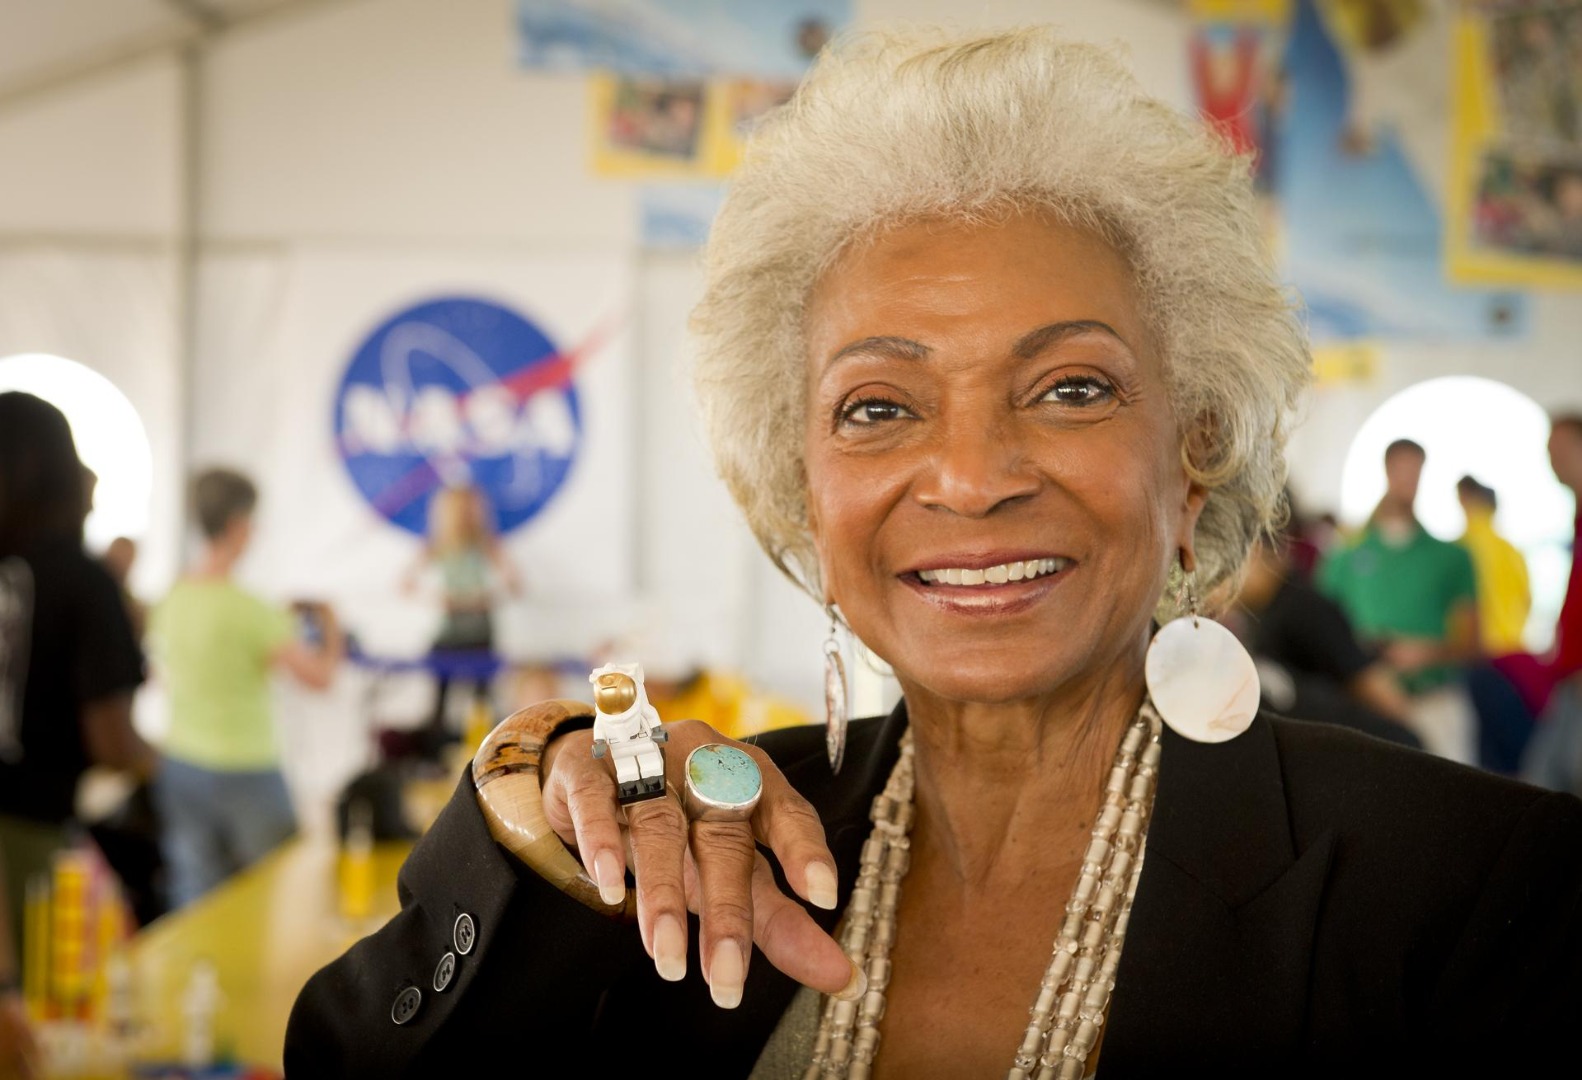 View the biography of Nichelle Nichols